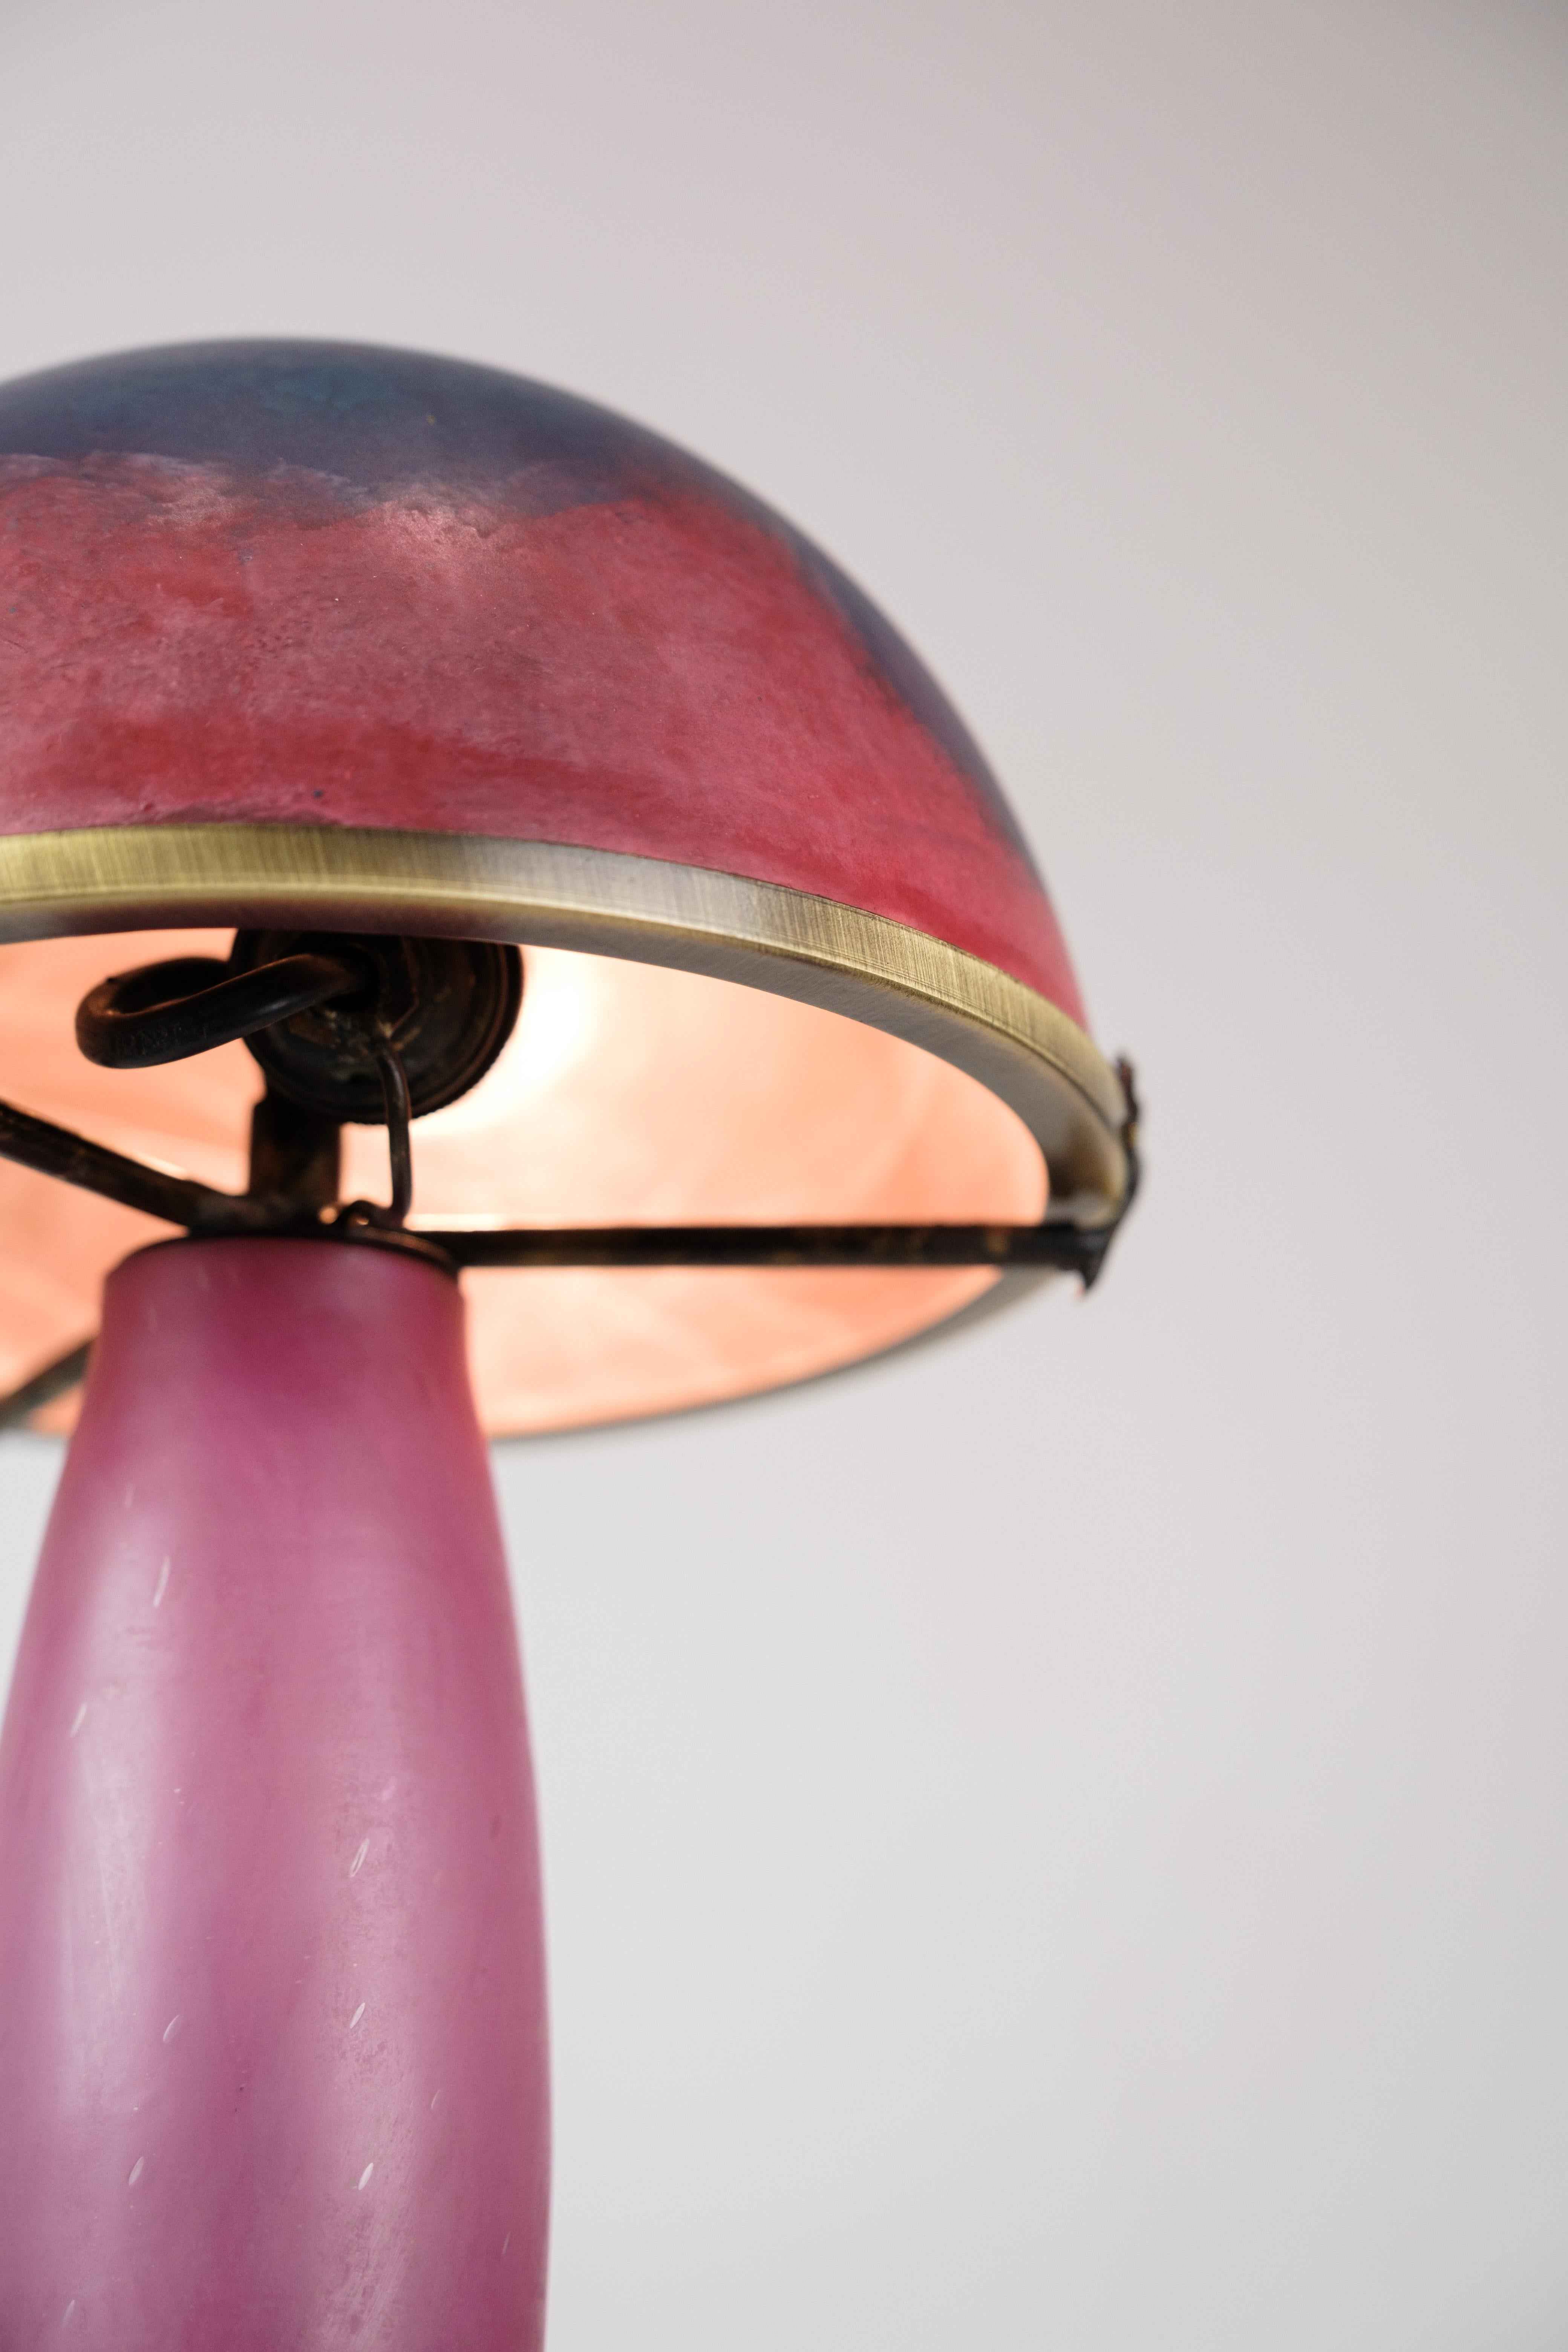 French Table Lamp in Dark Purple and Bordeaux Colors, Le Verre Francais, 1920s For Sale 3